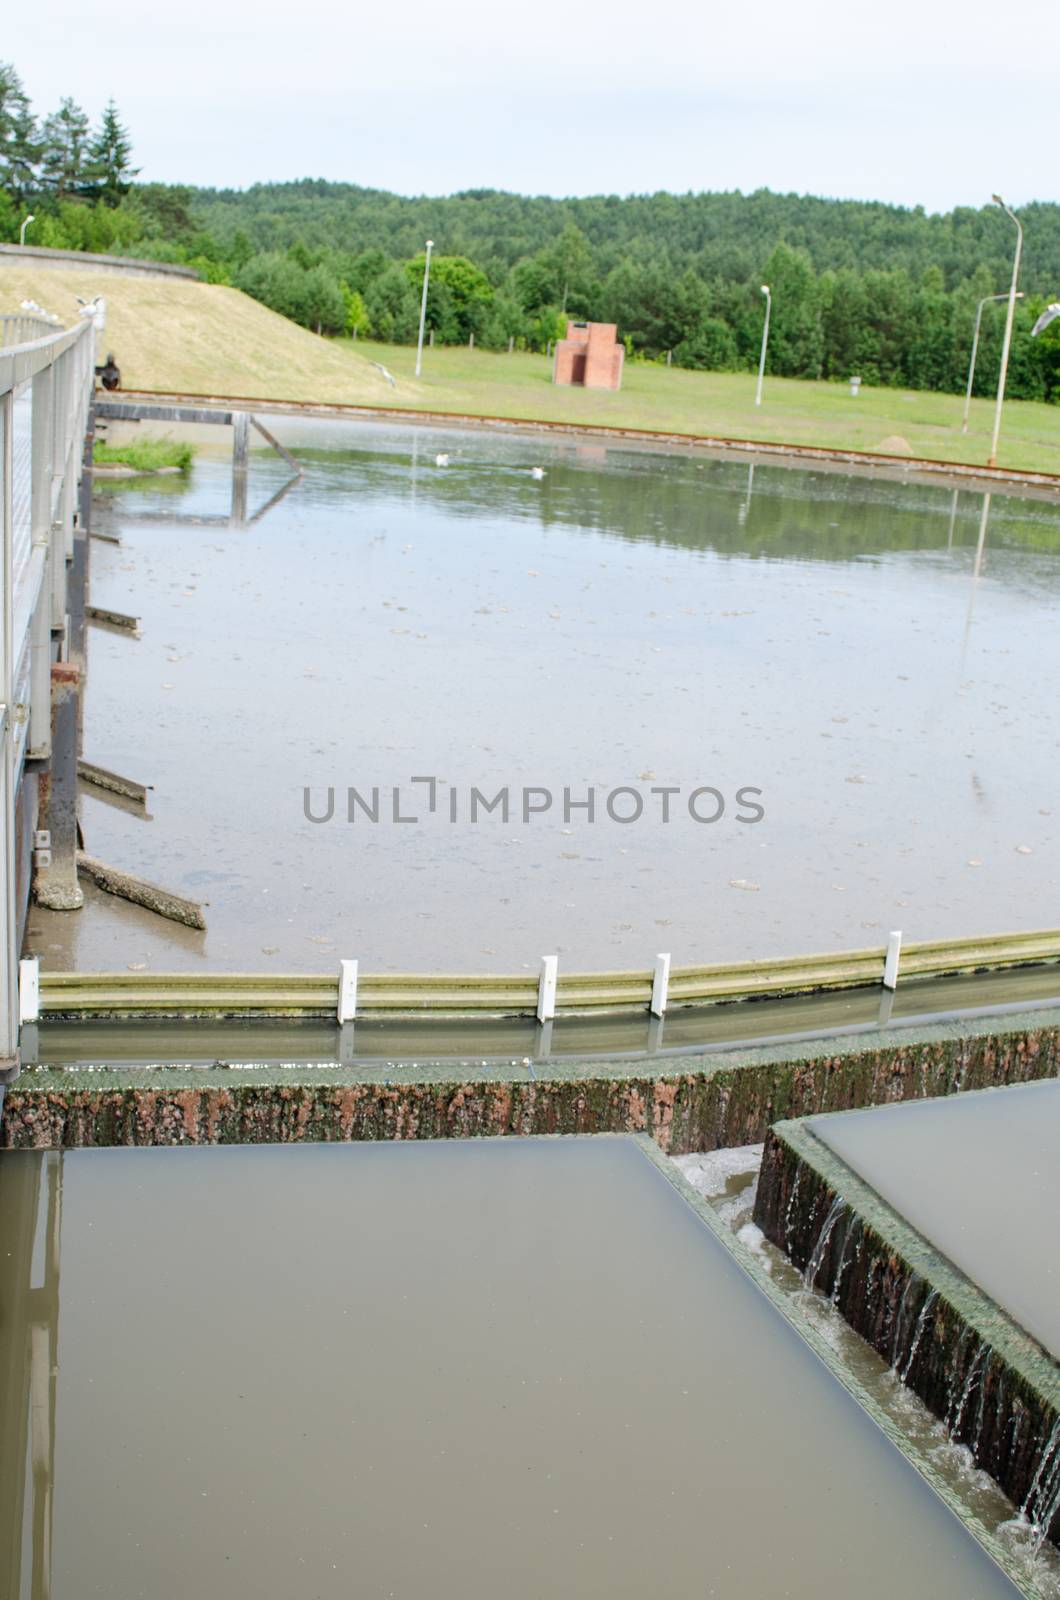 Primary sewage waste water clarification step in treatment facility equipment.